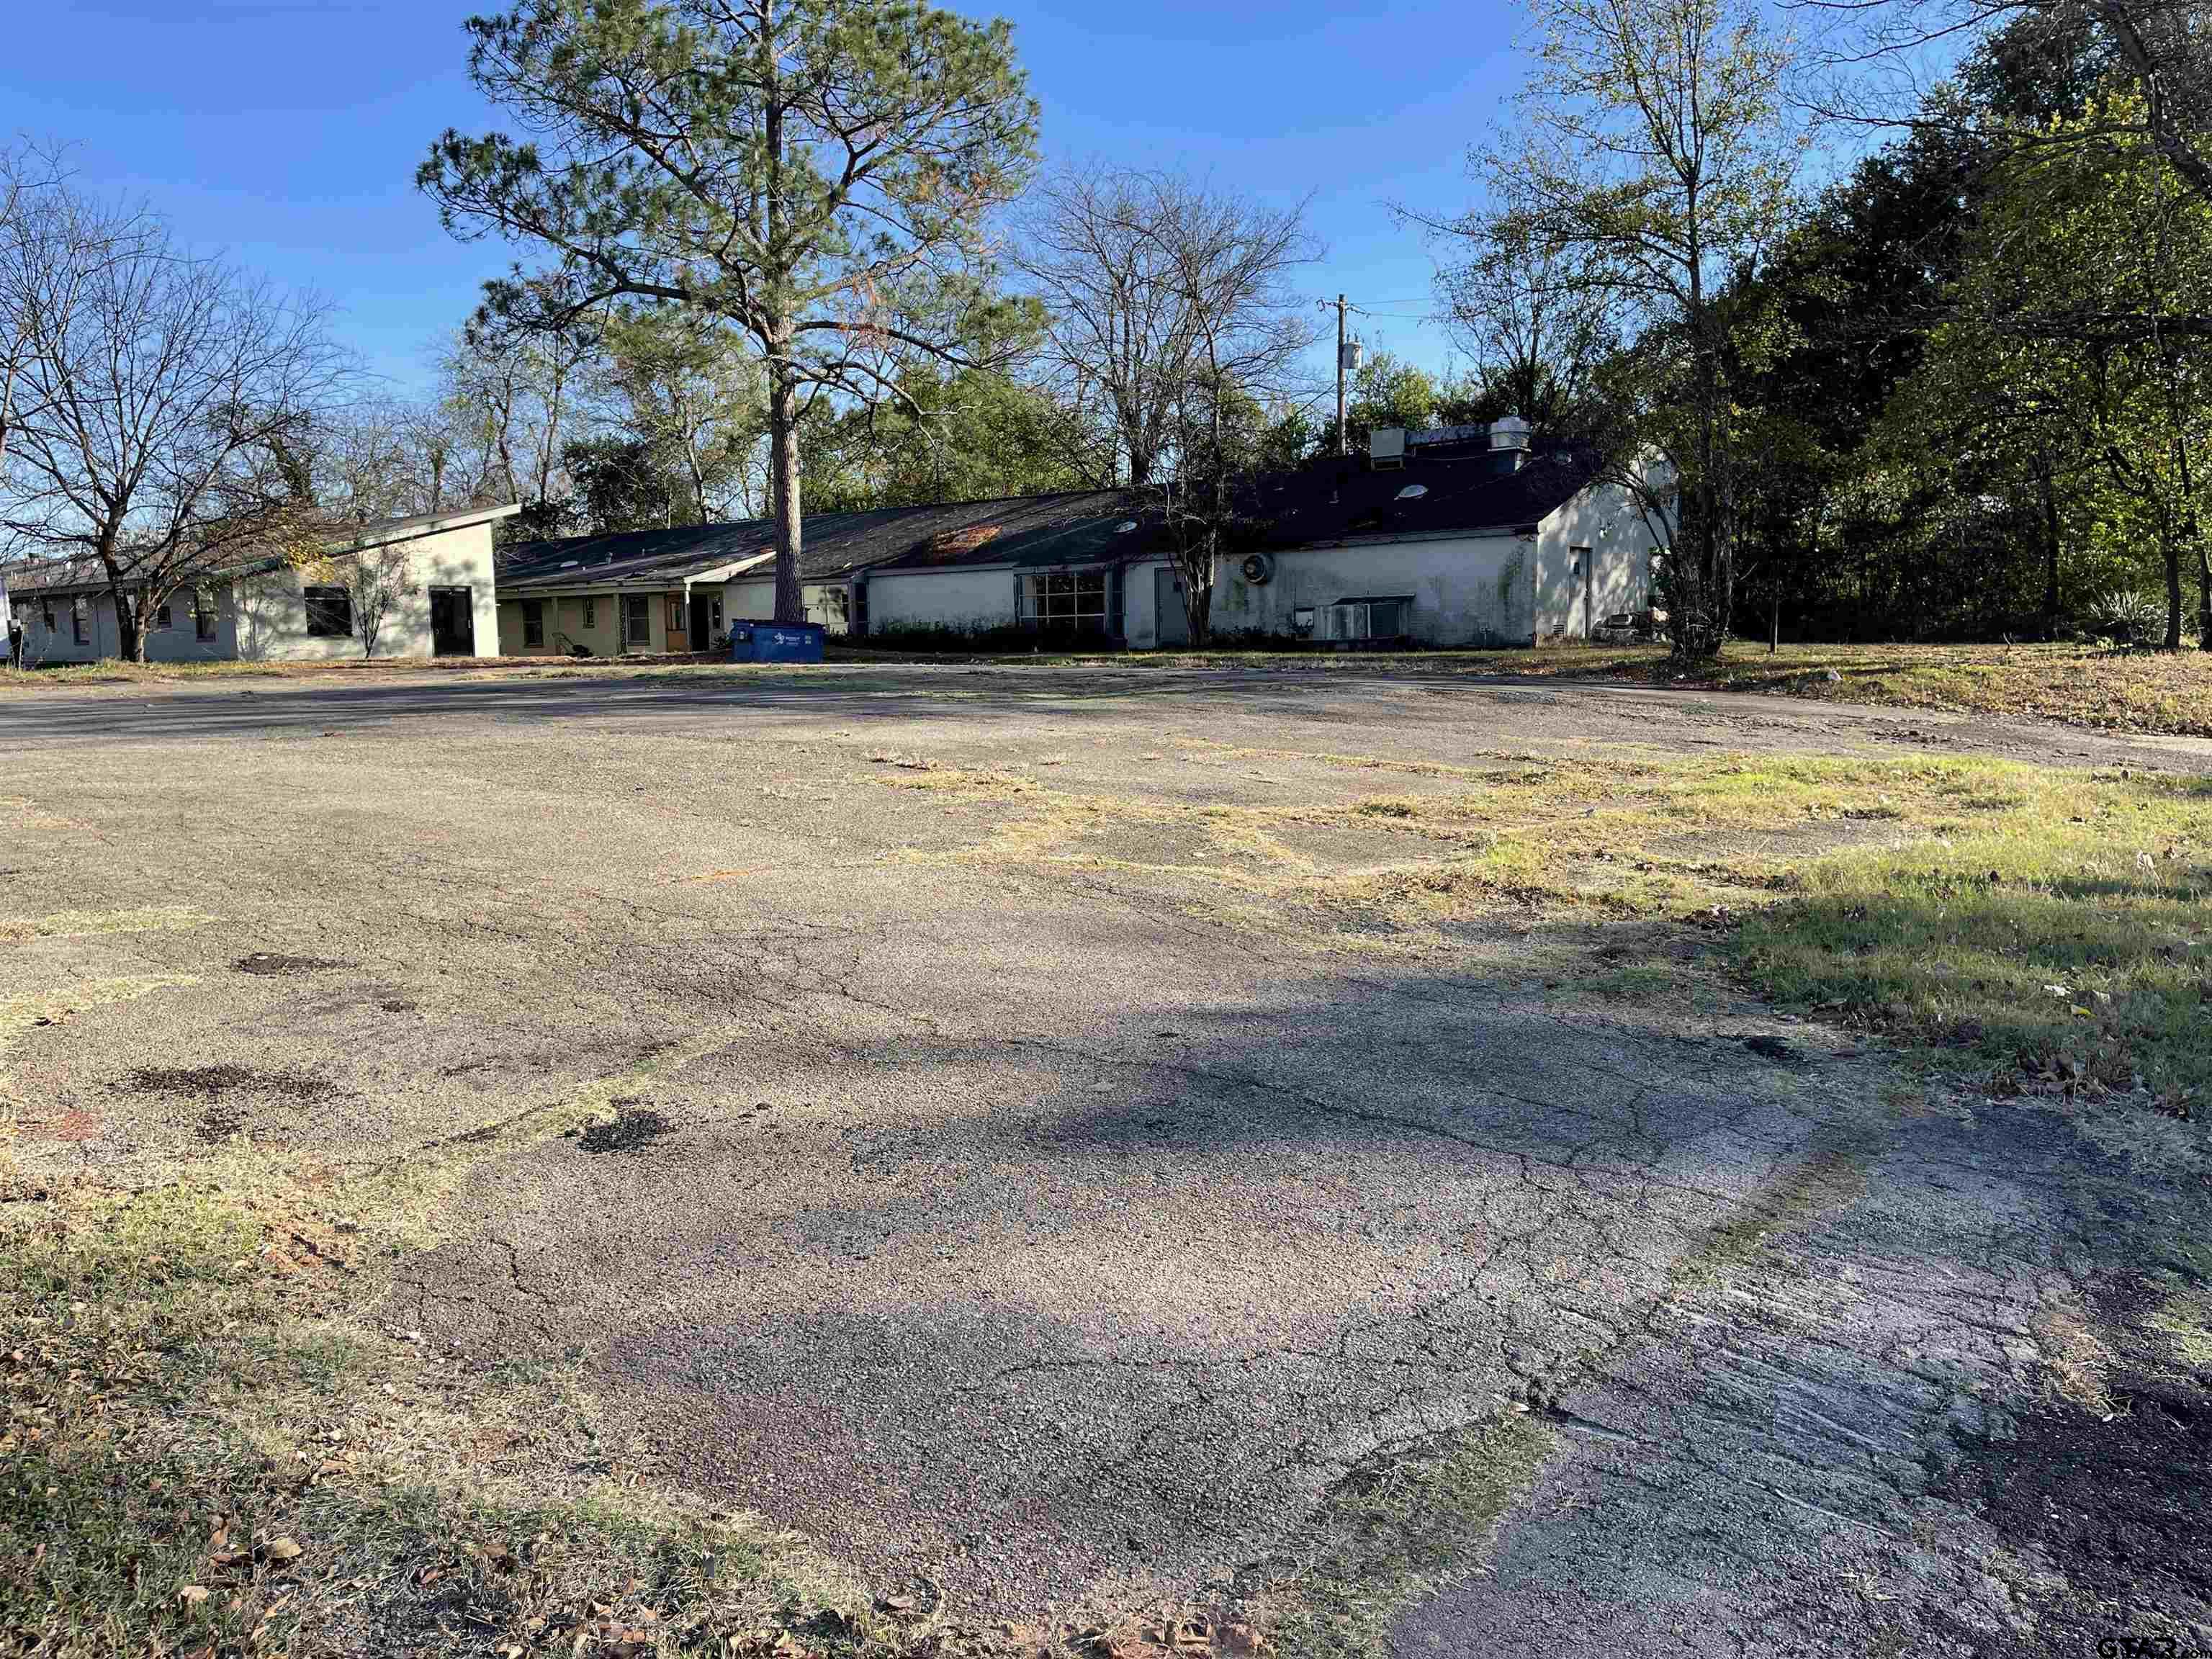 FOR SALE, COMMERCIAL PROPERTY!! Zoned general retail - multi-use lot. Let your mind go wild!